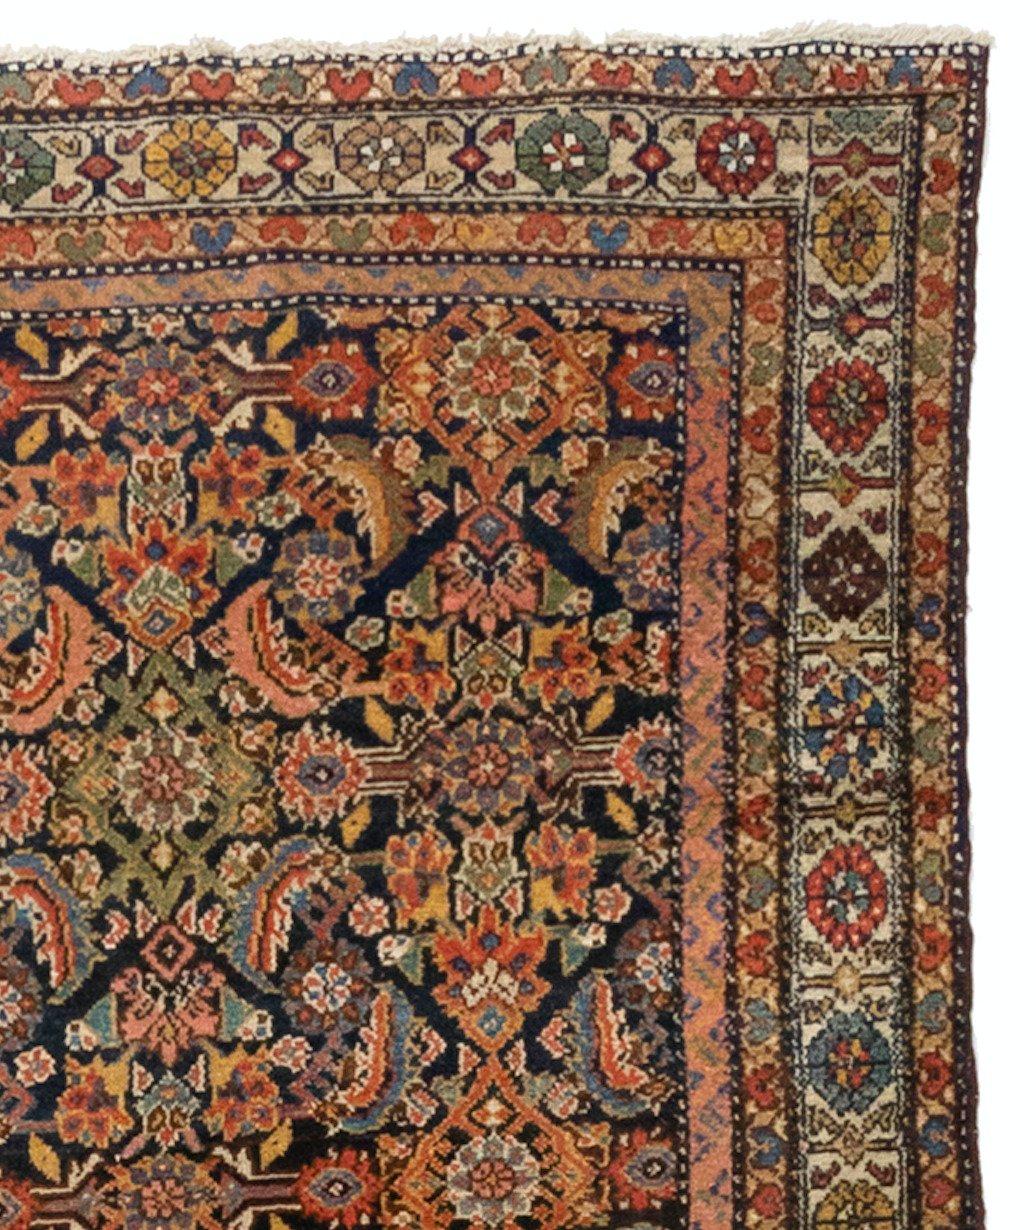 Antique Rust Ivory Navy Blue Geometric Malayer Persian Rug, circa 1880-1900s In Good Condition For Sale In New York, NY